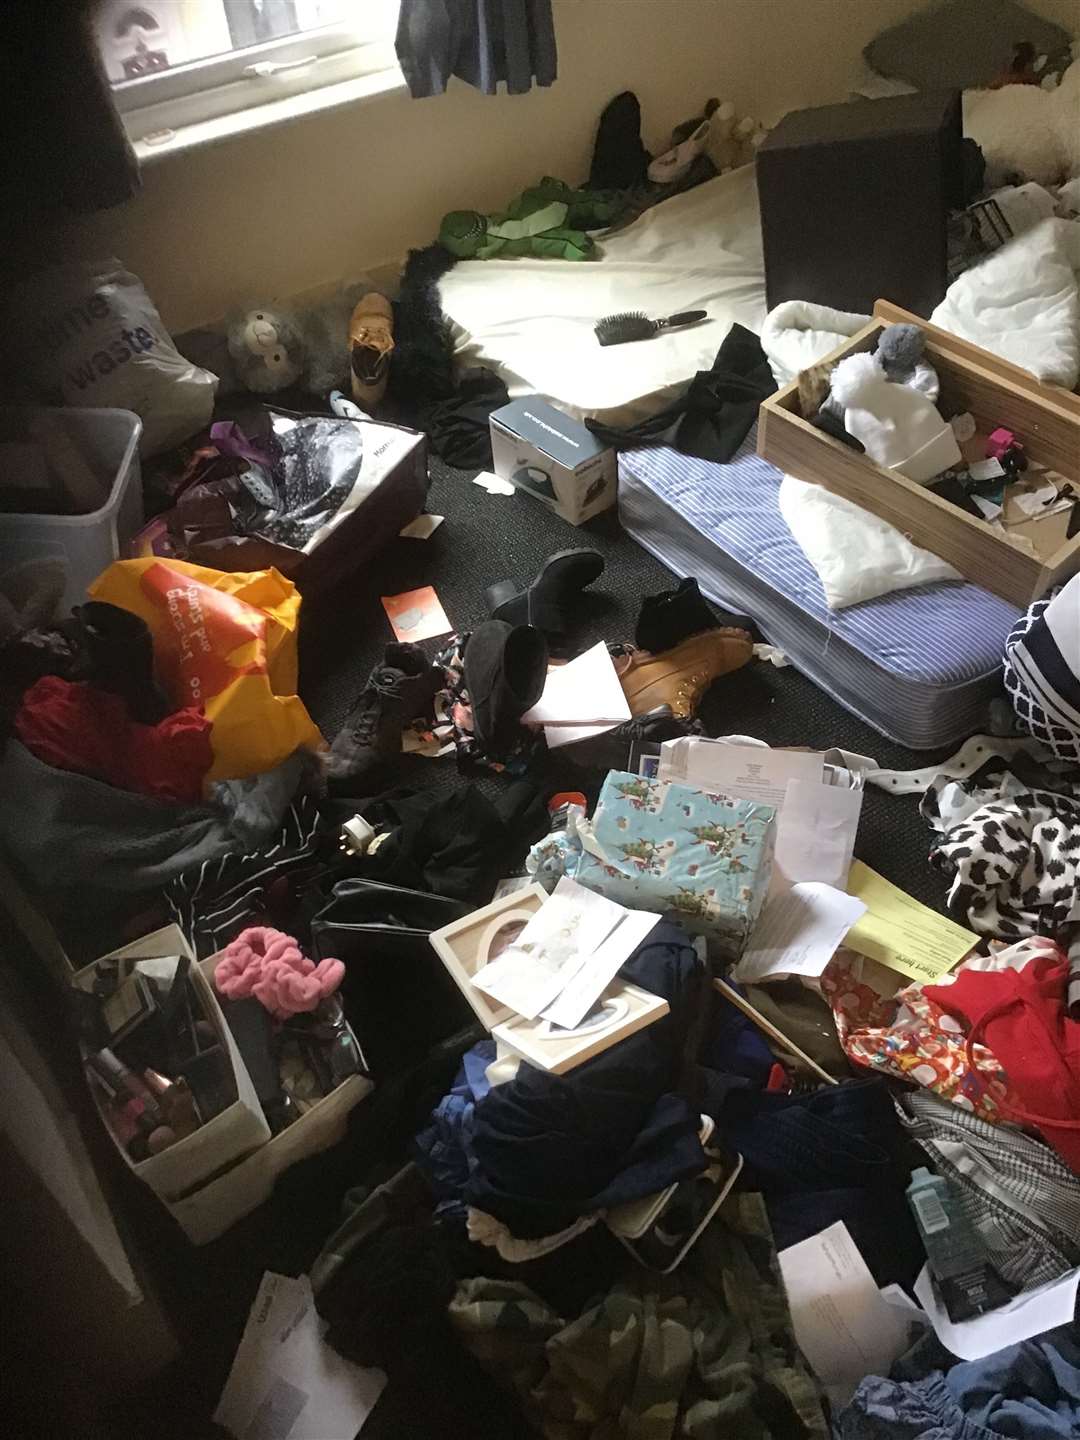 The home of a deceased horder, which the firm was asked to clean